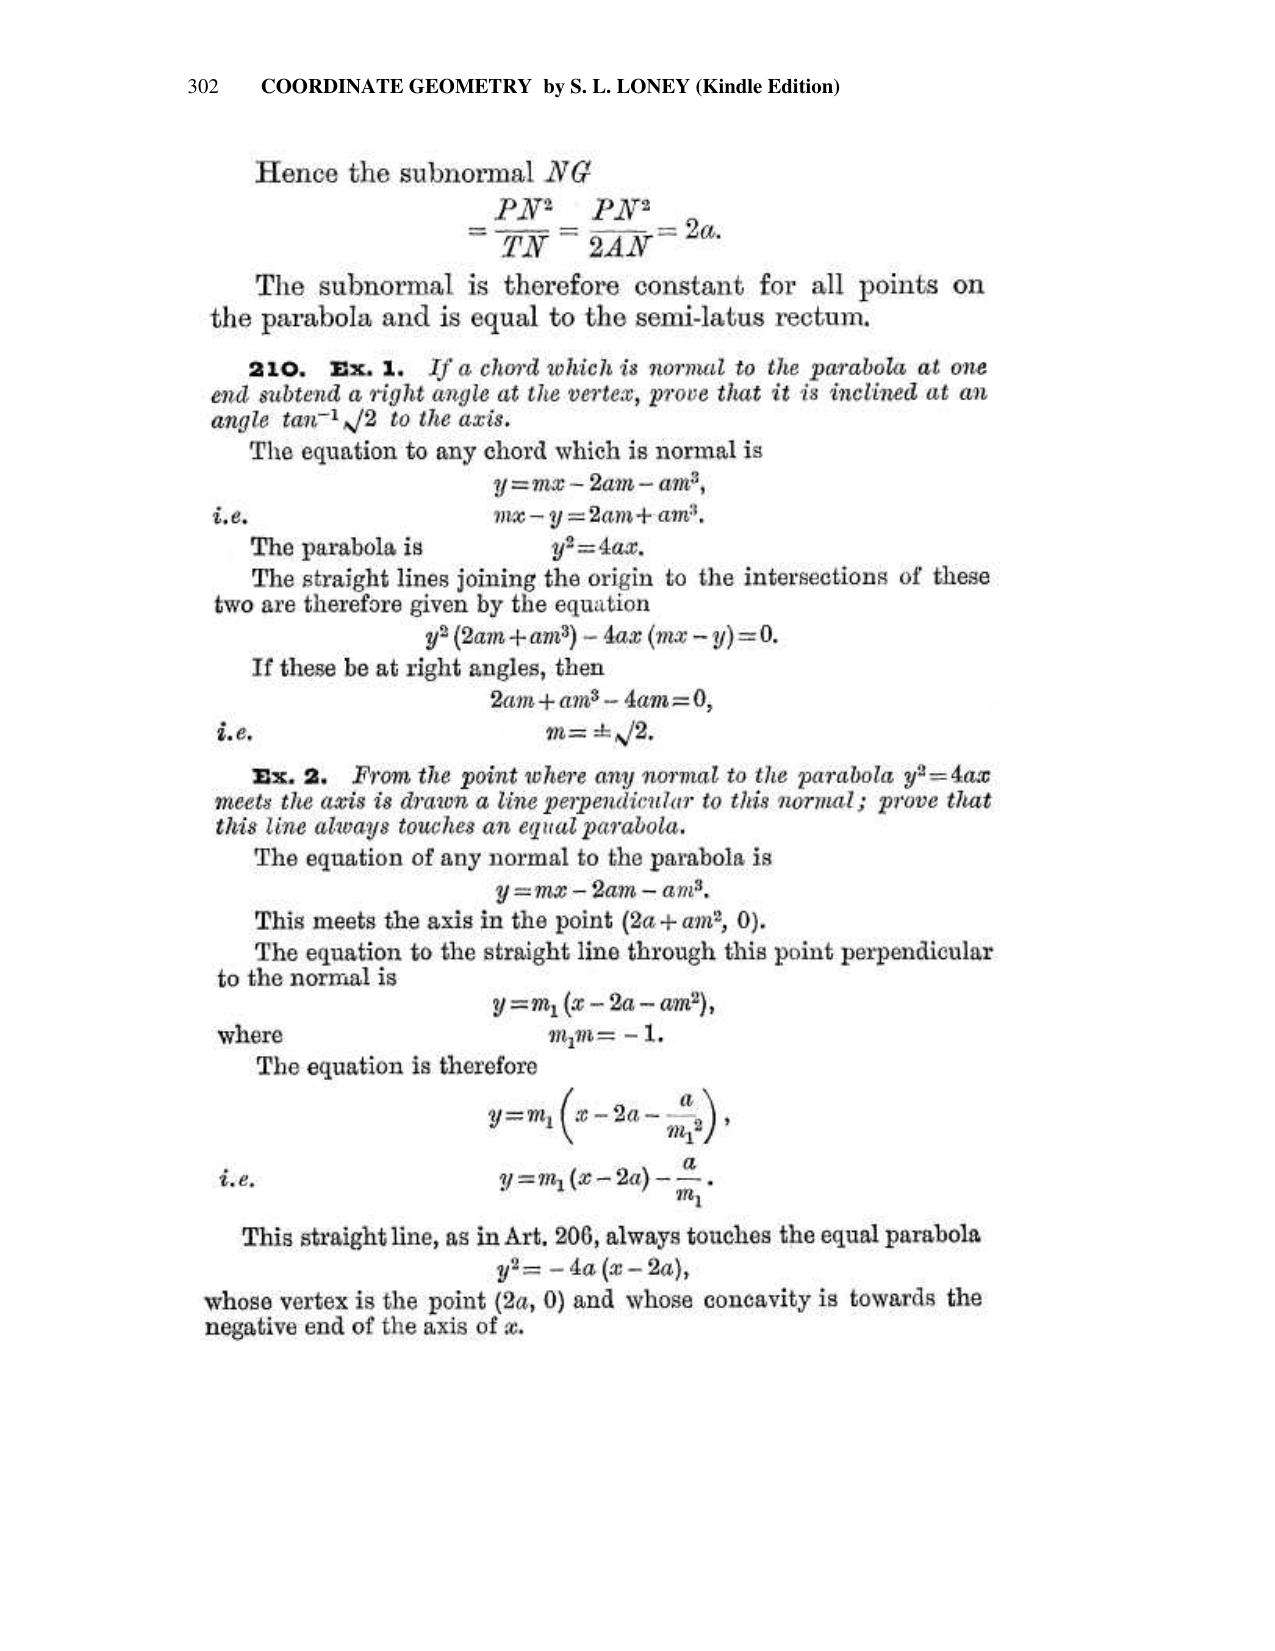 Chapter 10: The Parabola - SL Loney Solutions: The Elements of Coordinate Geometry - Page 16